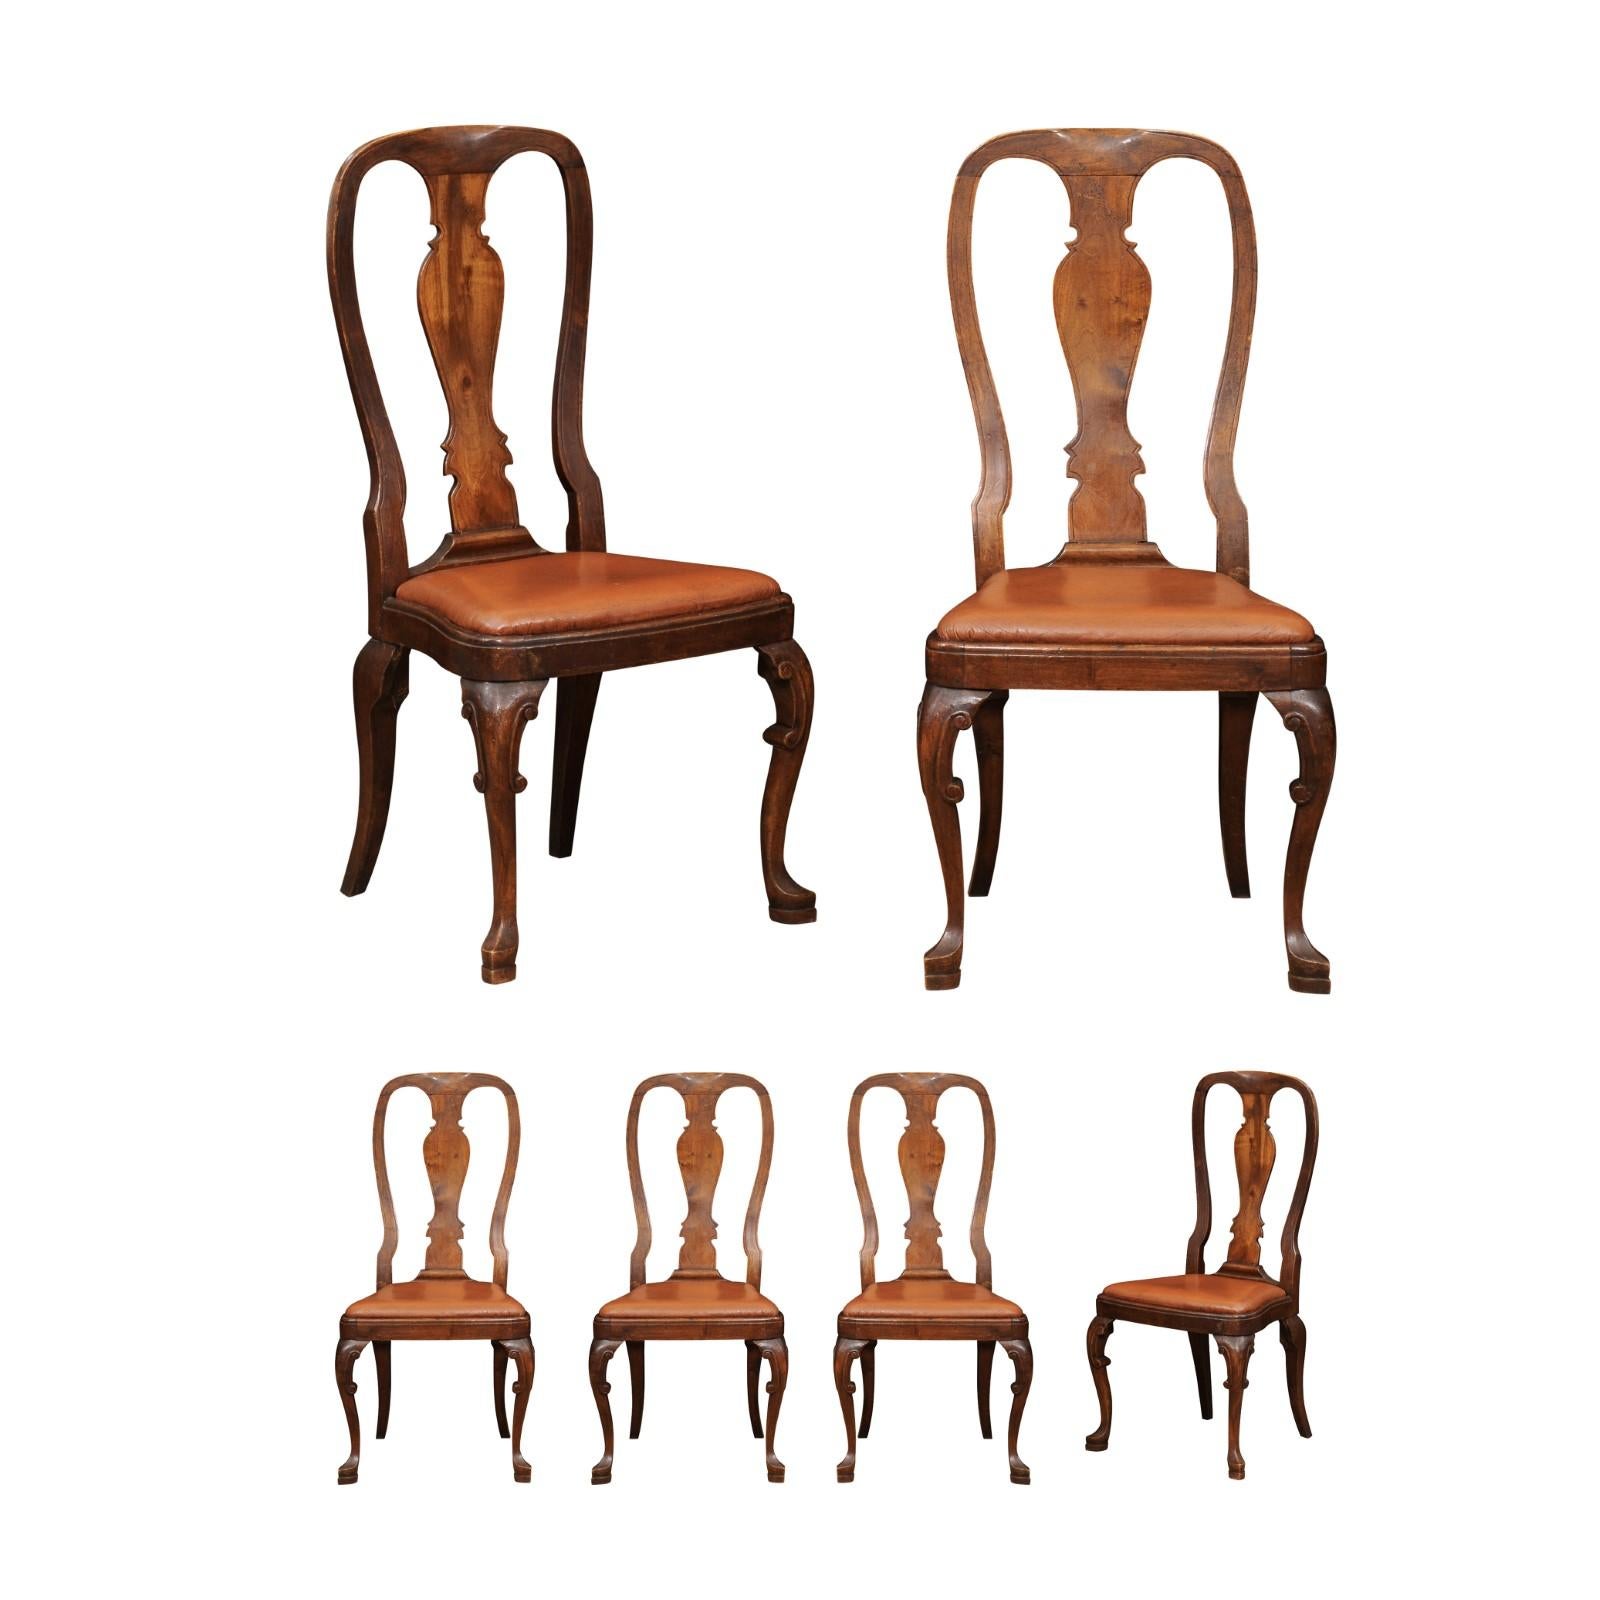 Set of 6 Italian Rococo Style Walnut Dining Chairs with Cabriole Legs & Leather Slip Seats, 19th Century. PRICED PER PAIR.